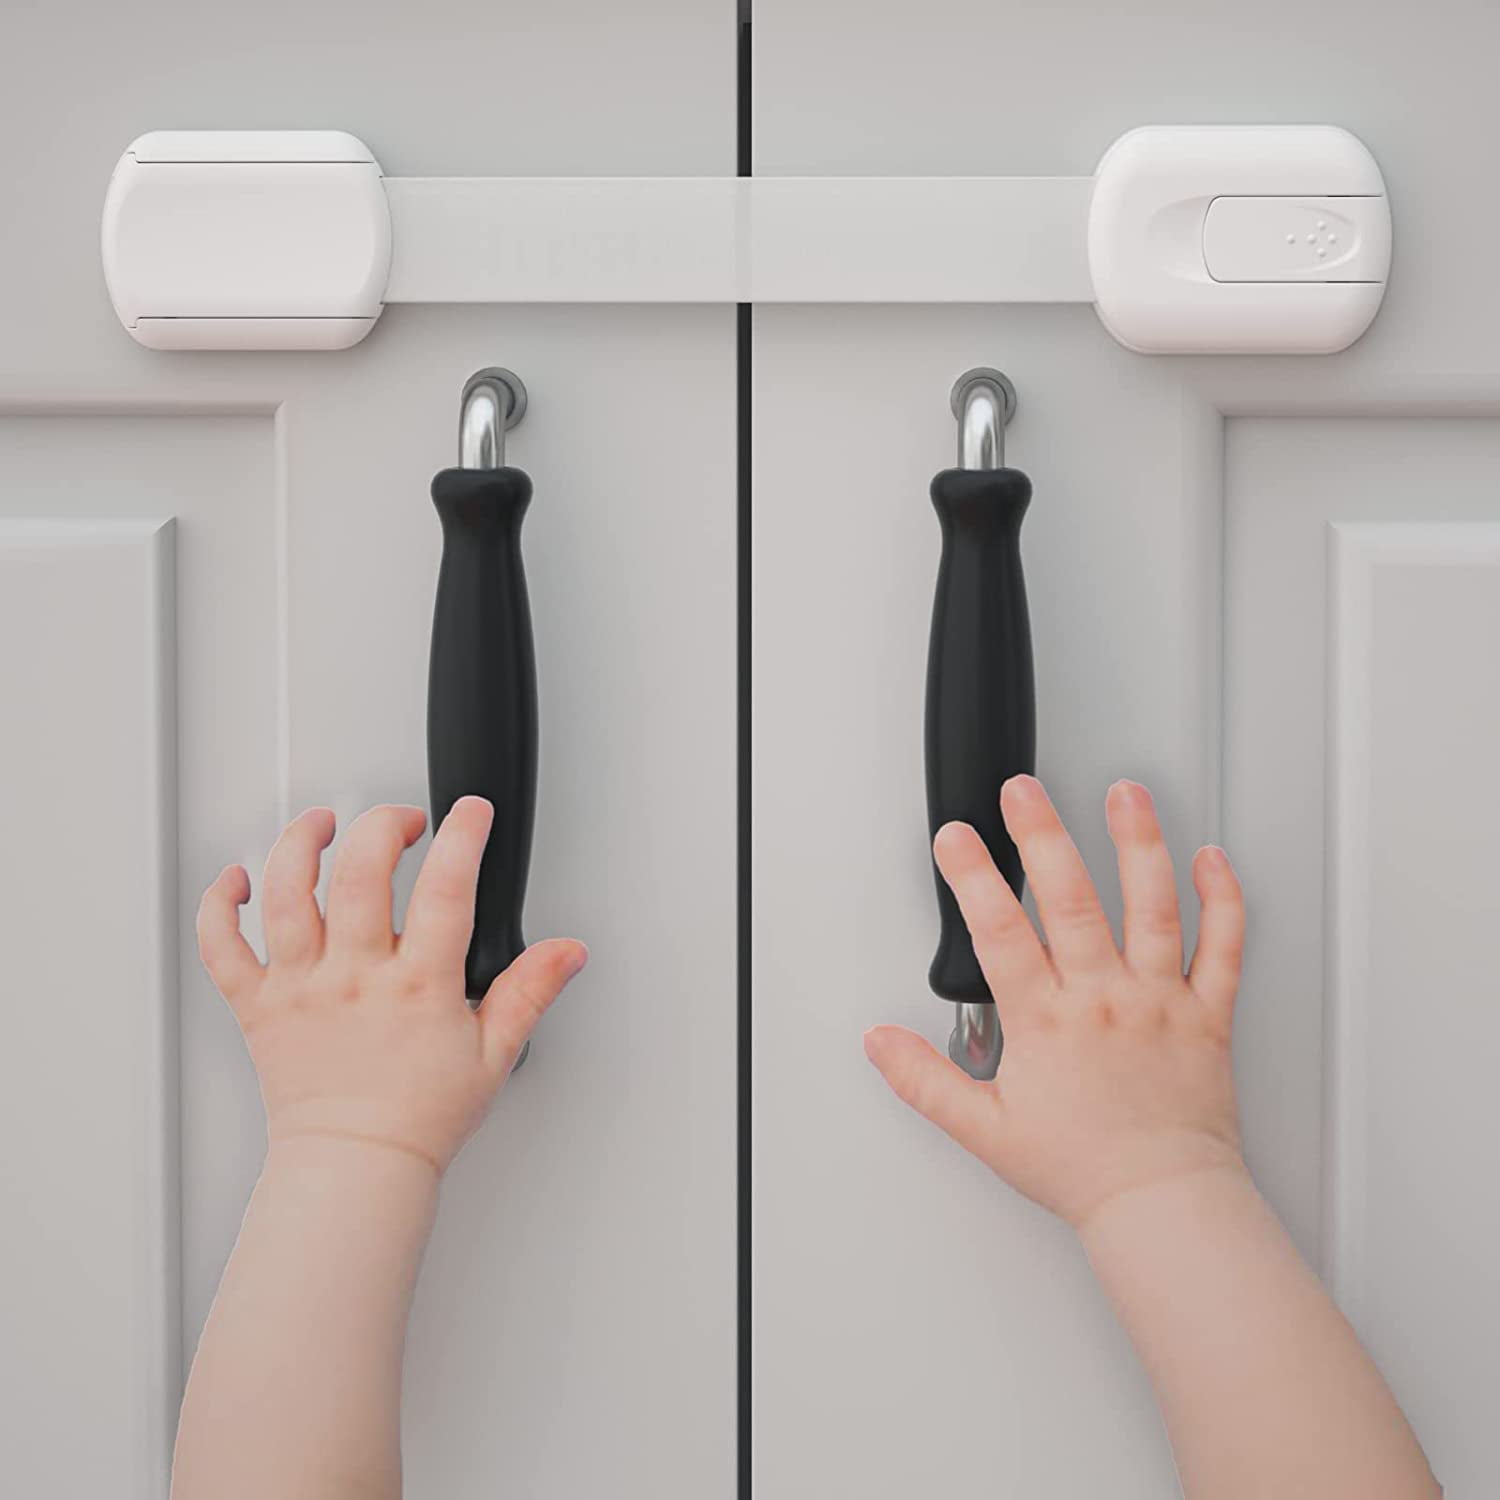 Child Proof Deluxe Door Top Lock by Safety Innovations